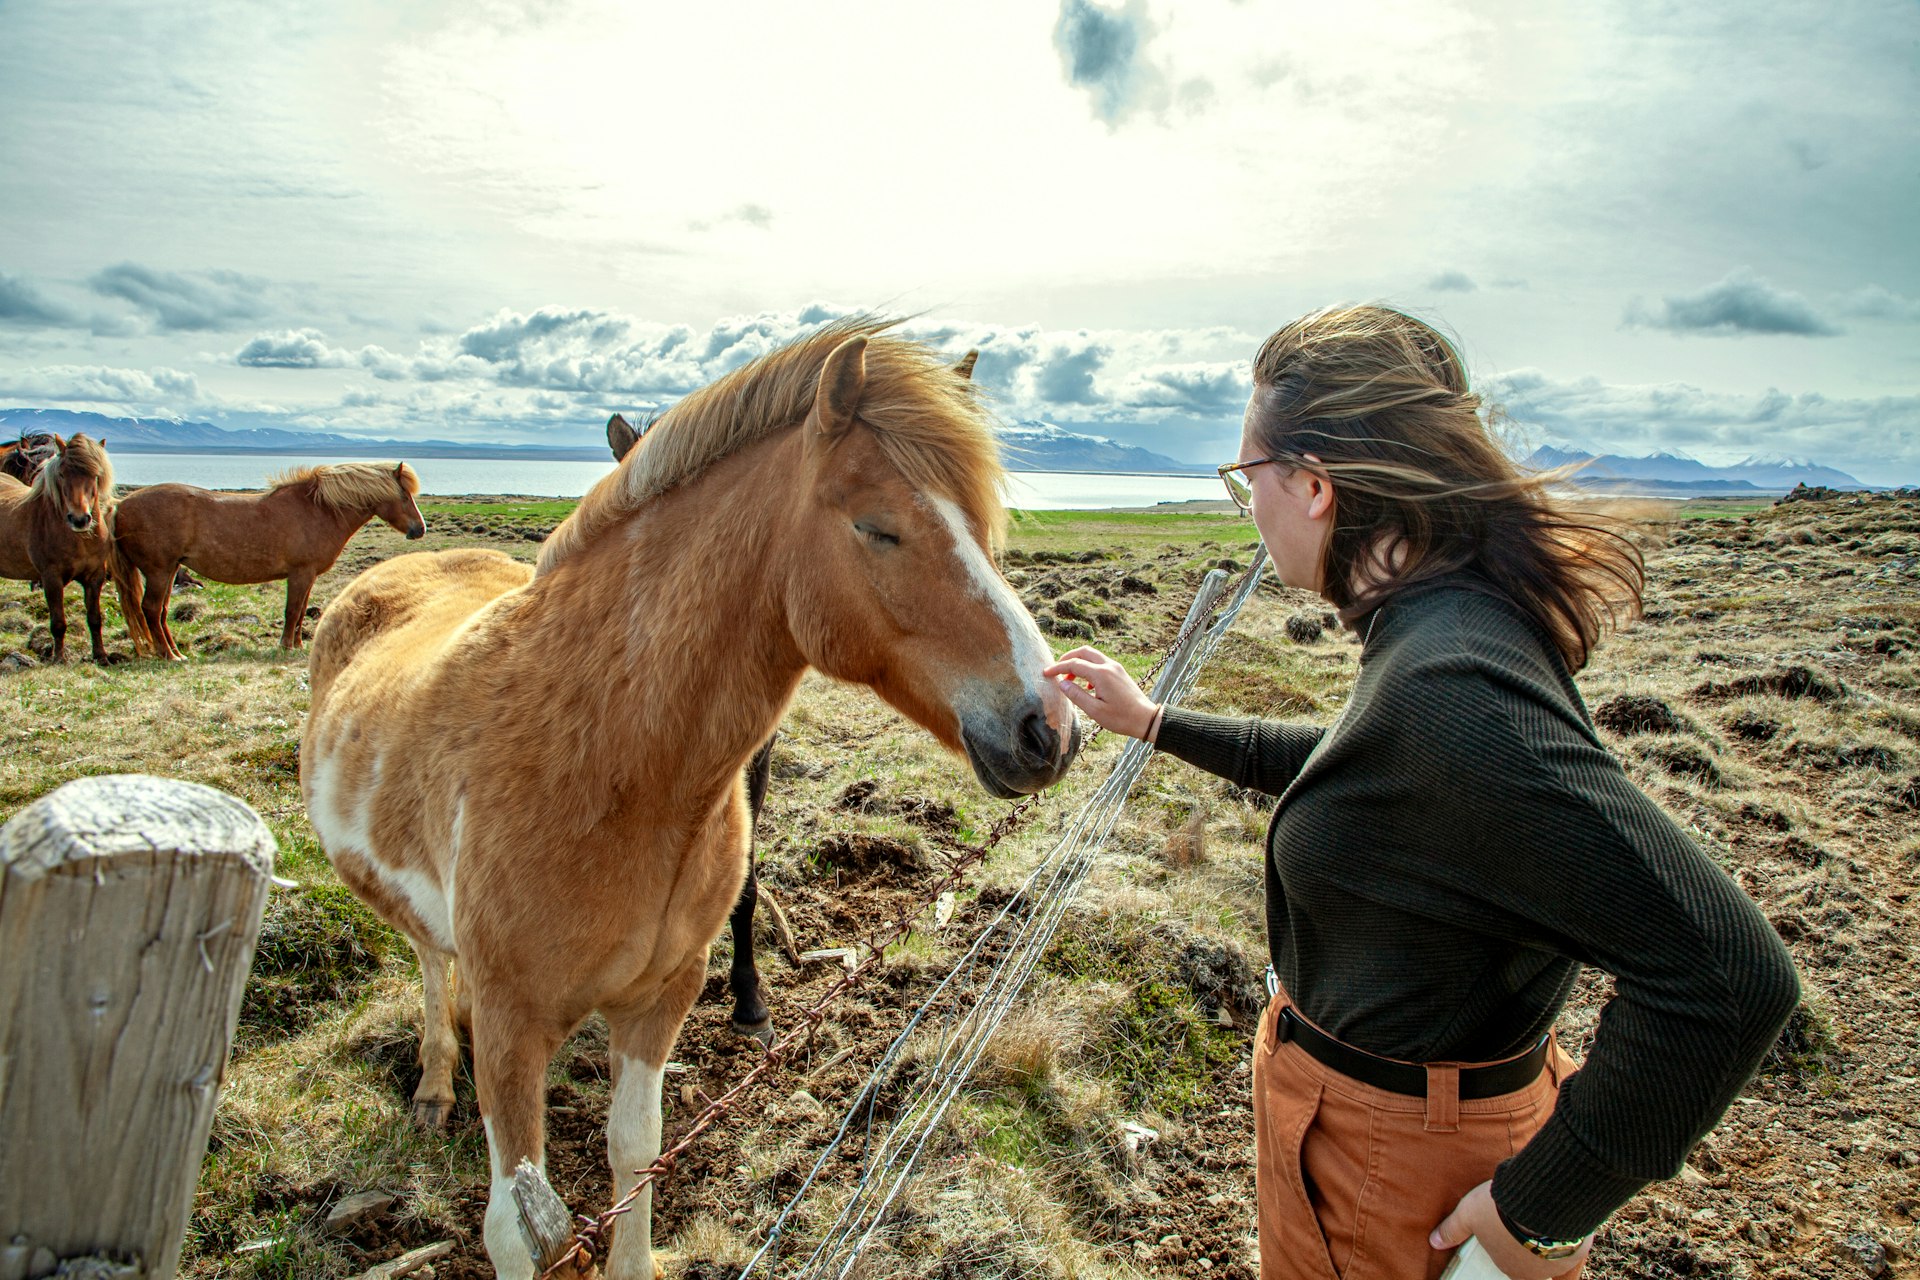 A woman strokes the nose of an Icelandic horse in countryside near a fjord